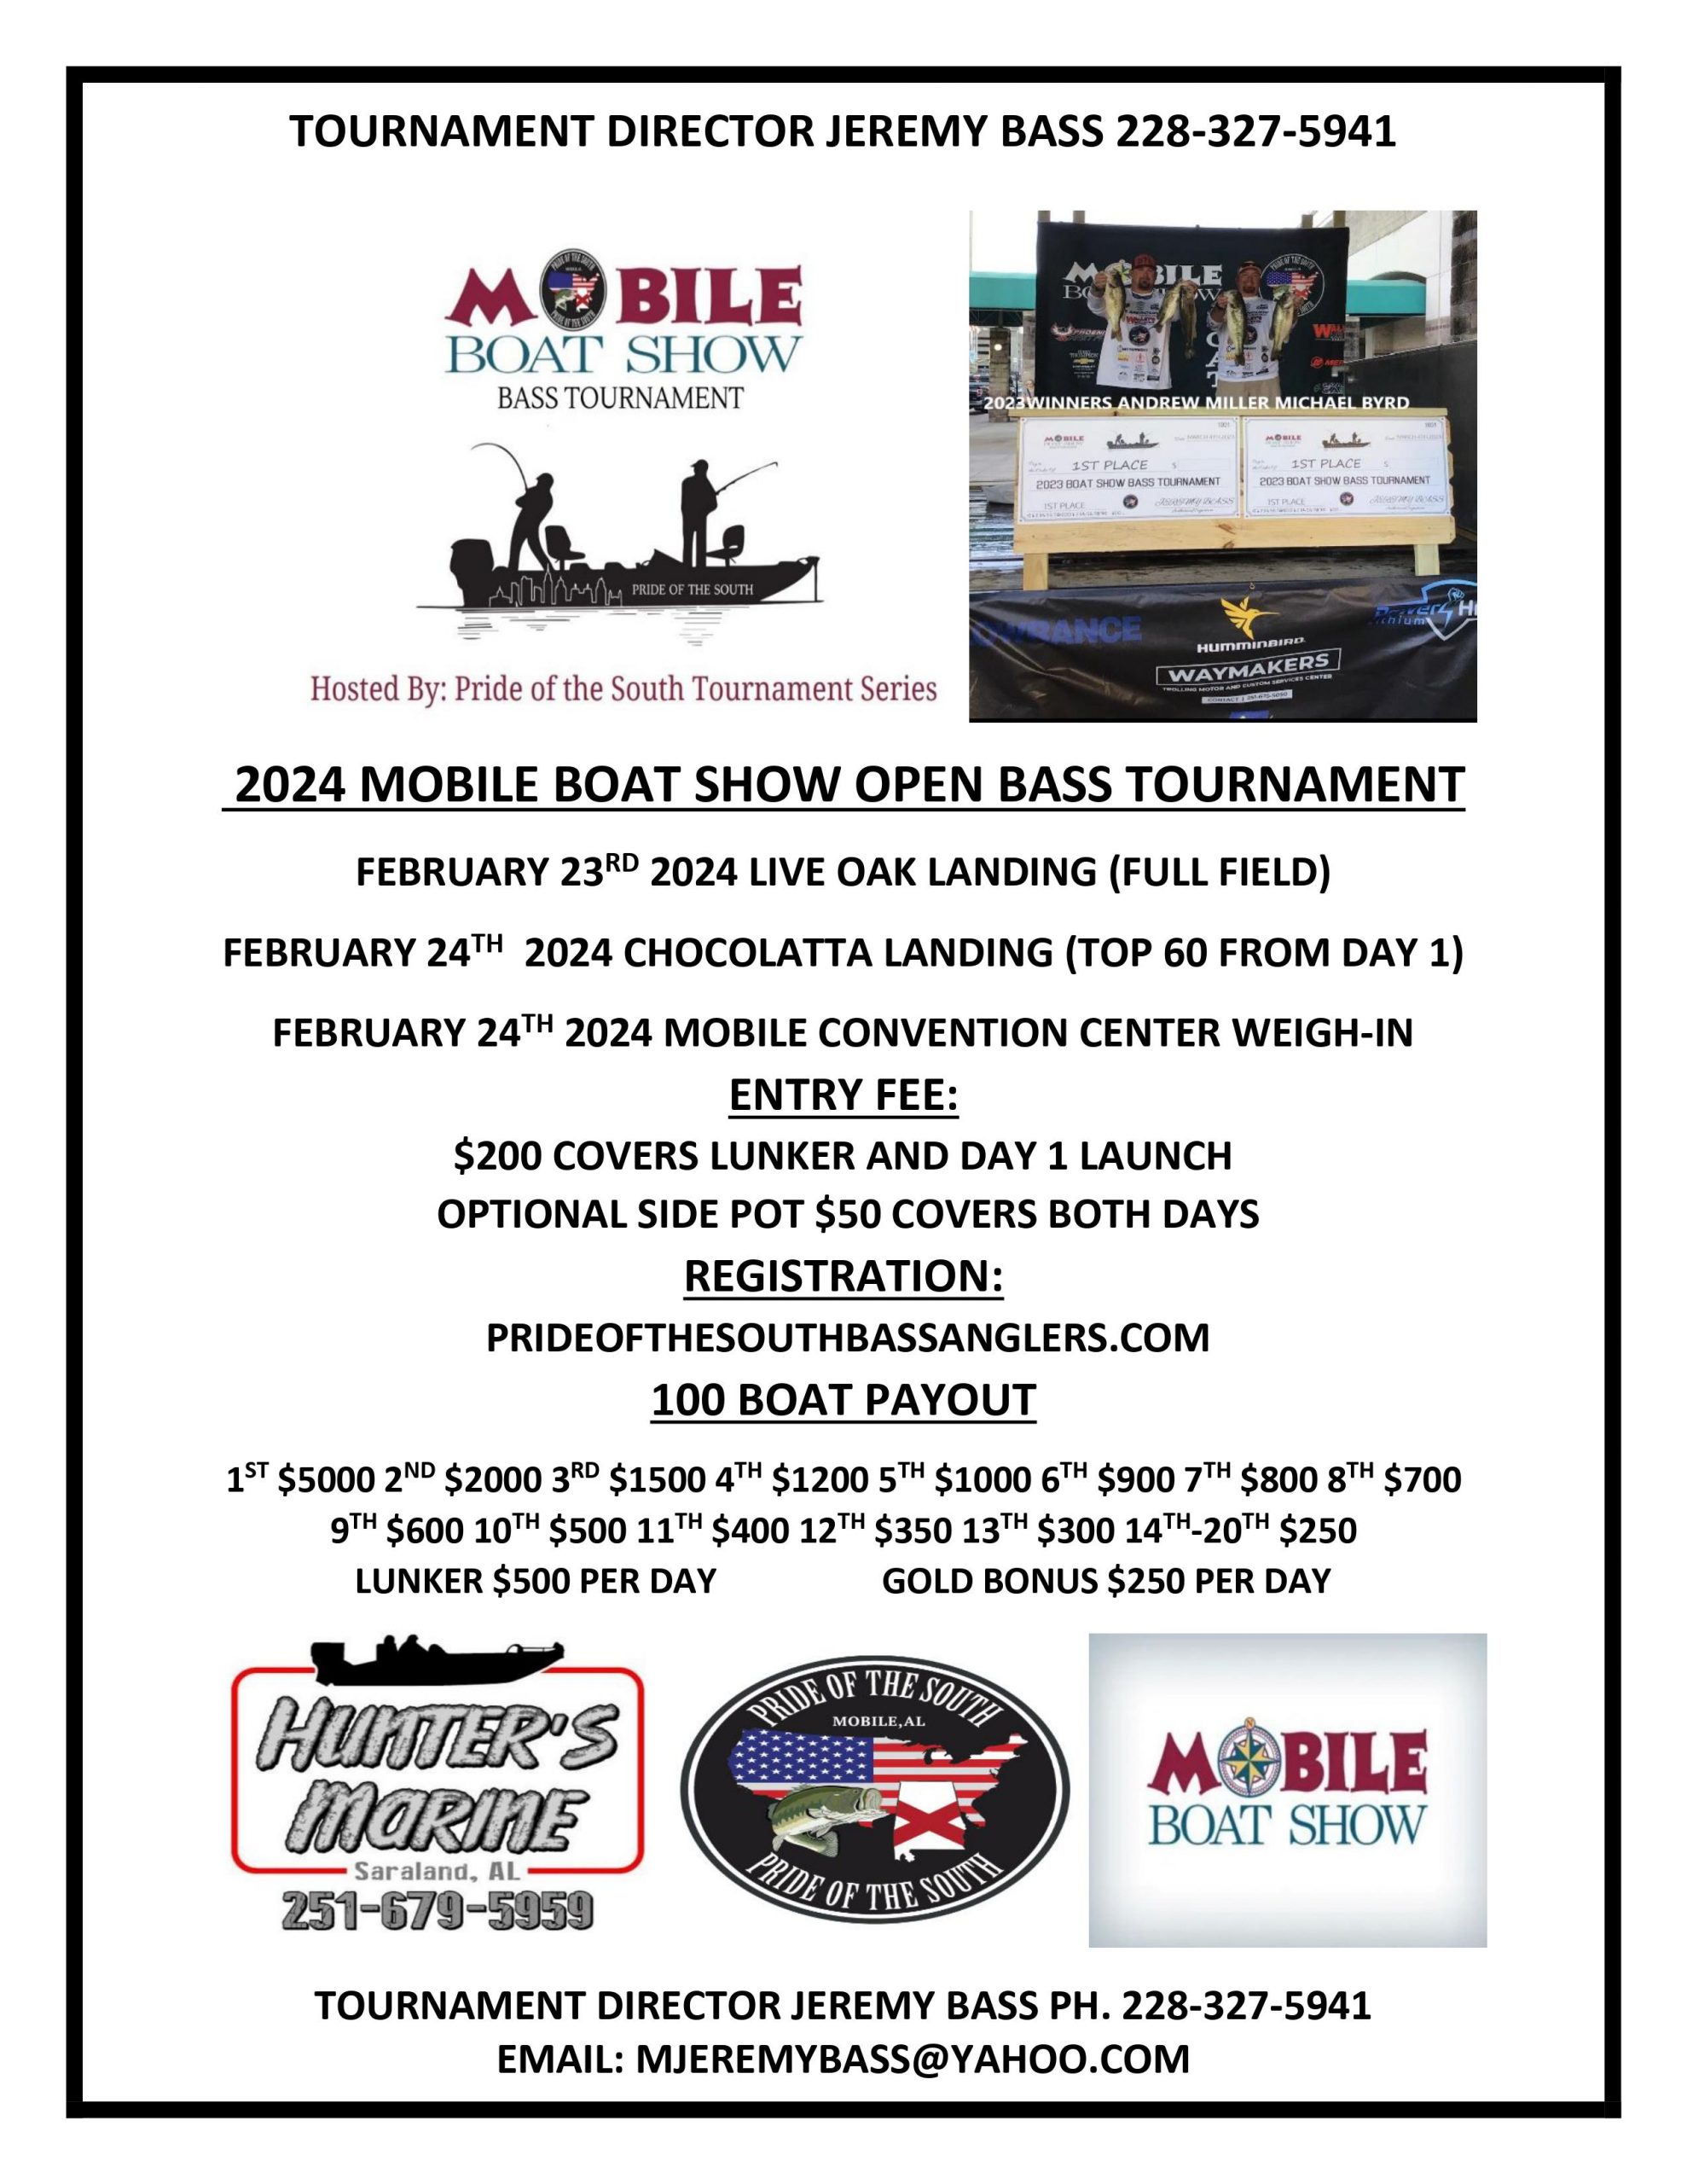 mobile boat show bass tournament info